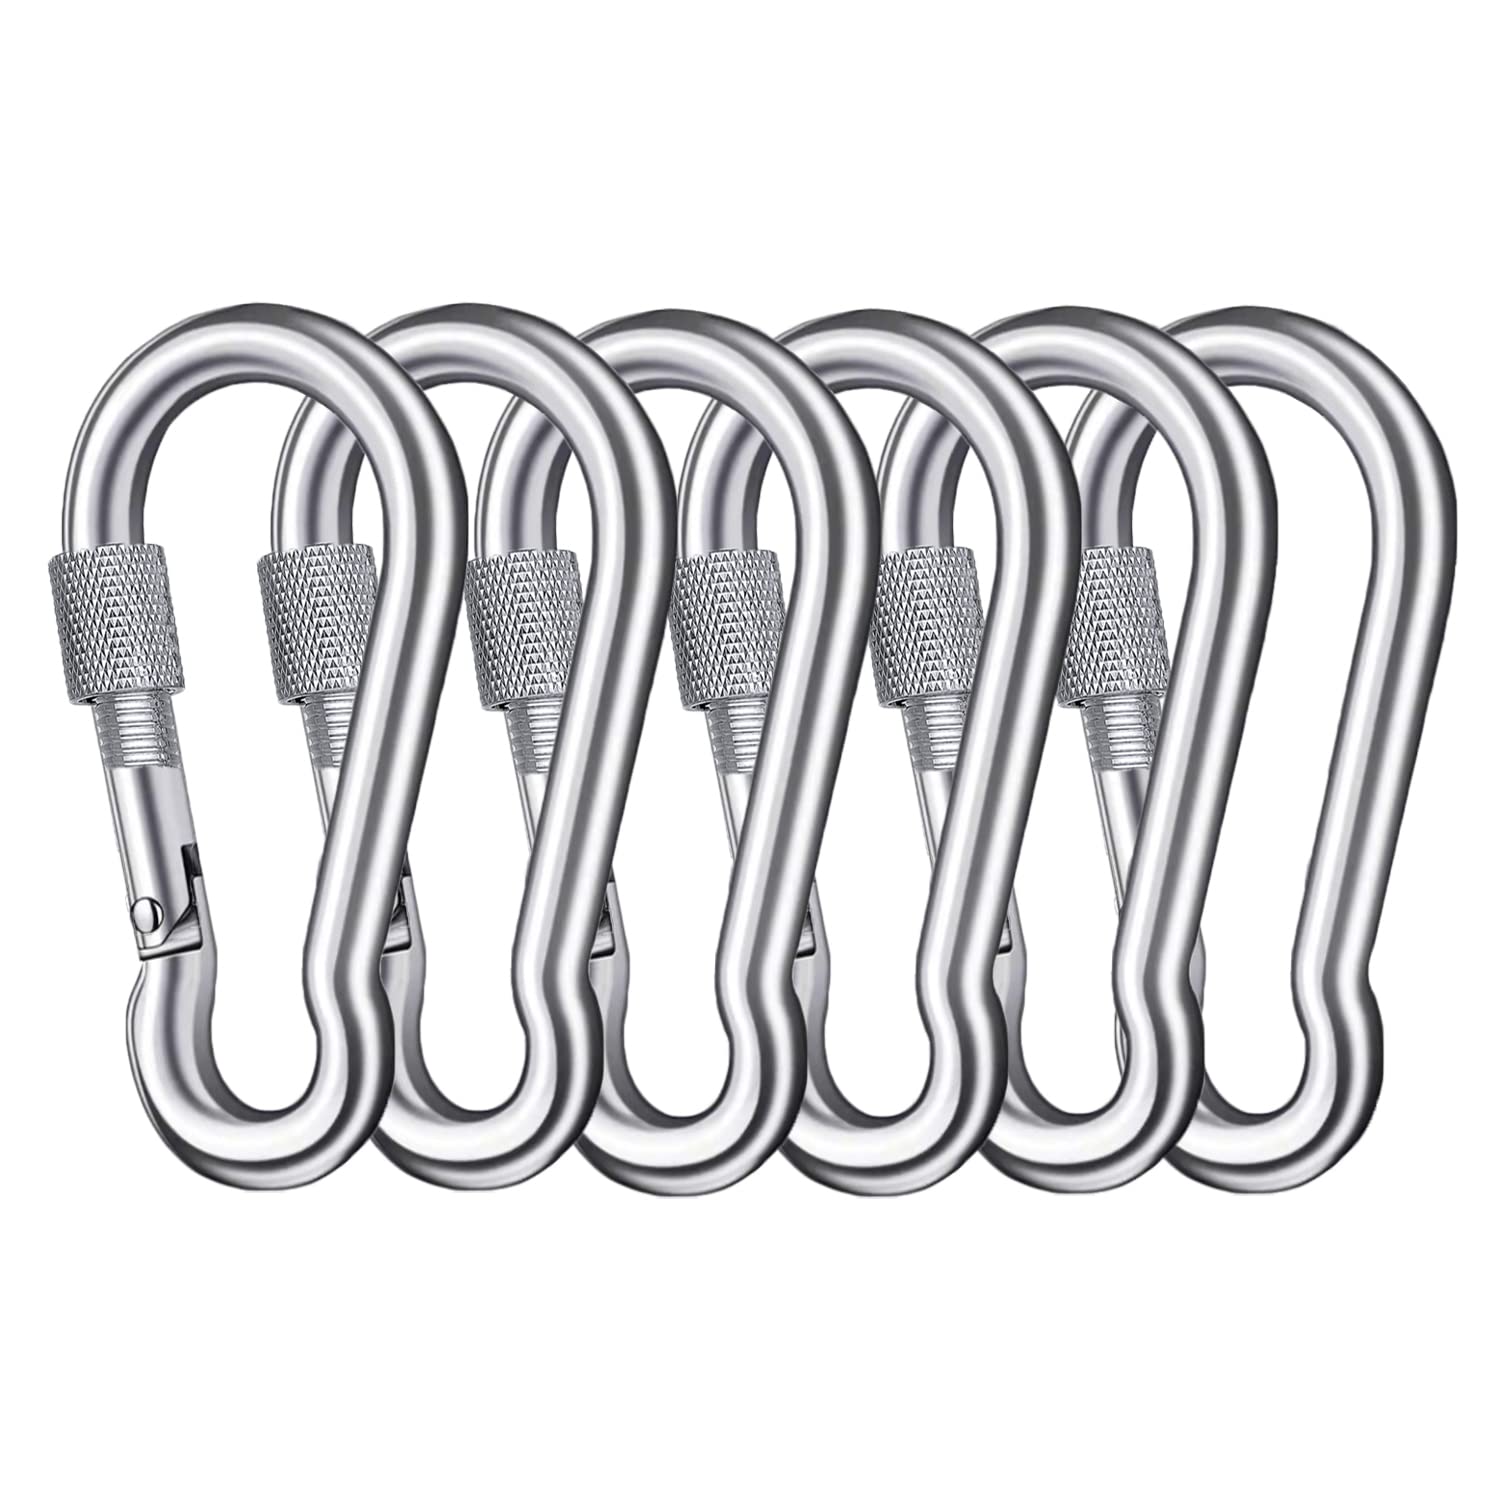 304 Stainless Steel Heavy Duty Carabiner Spring Snap Hook Clip M4 M5 M6 M8  M10